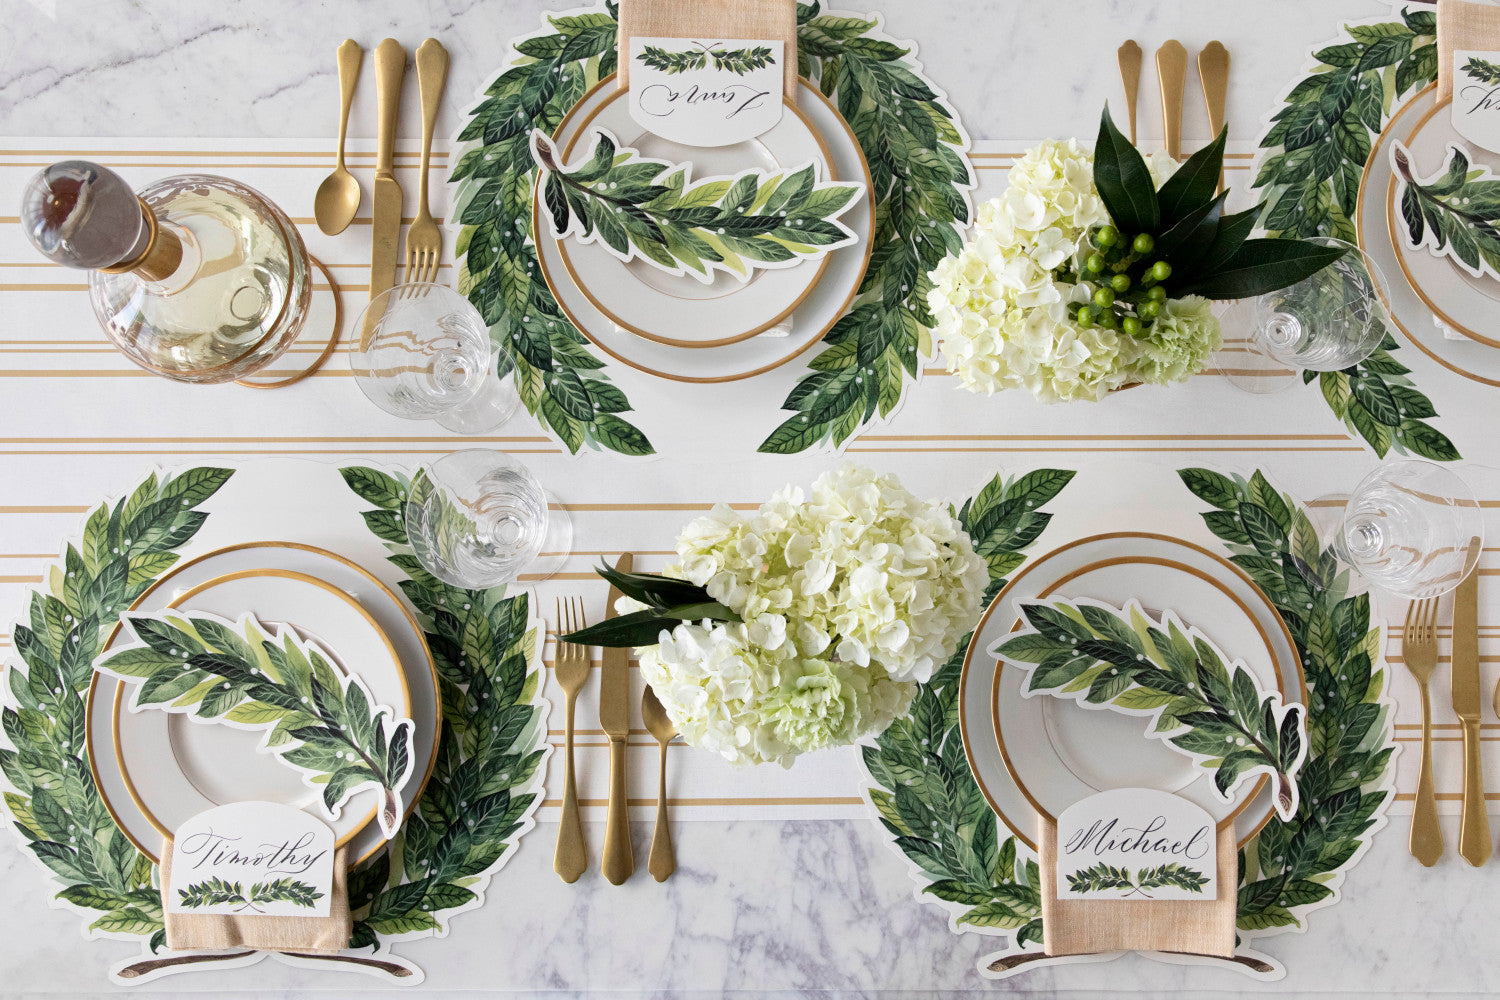 The Die-cut Green Laurel Wreath Placemat under an elegant table setting for four, from above.